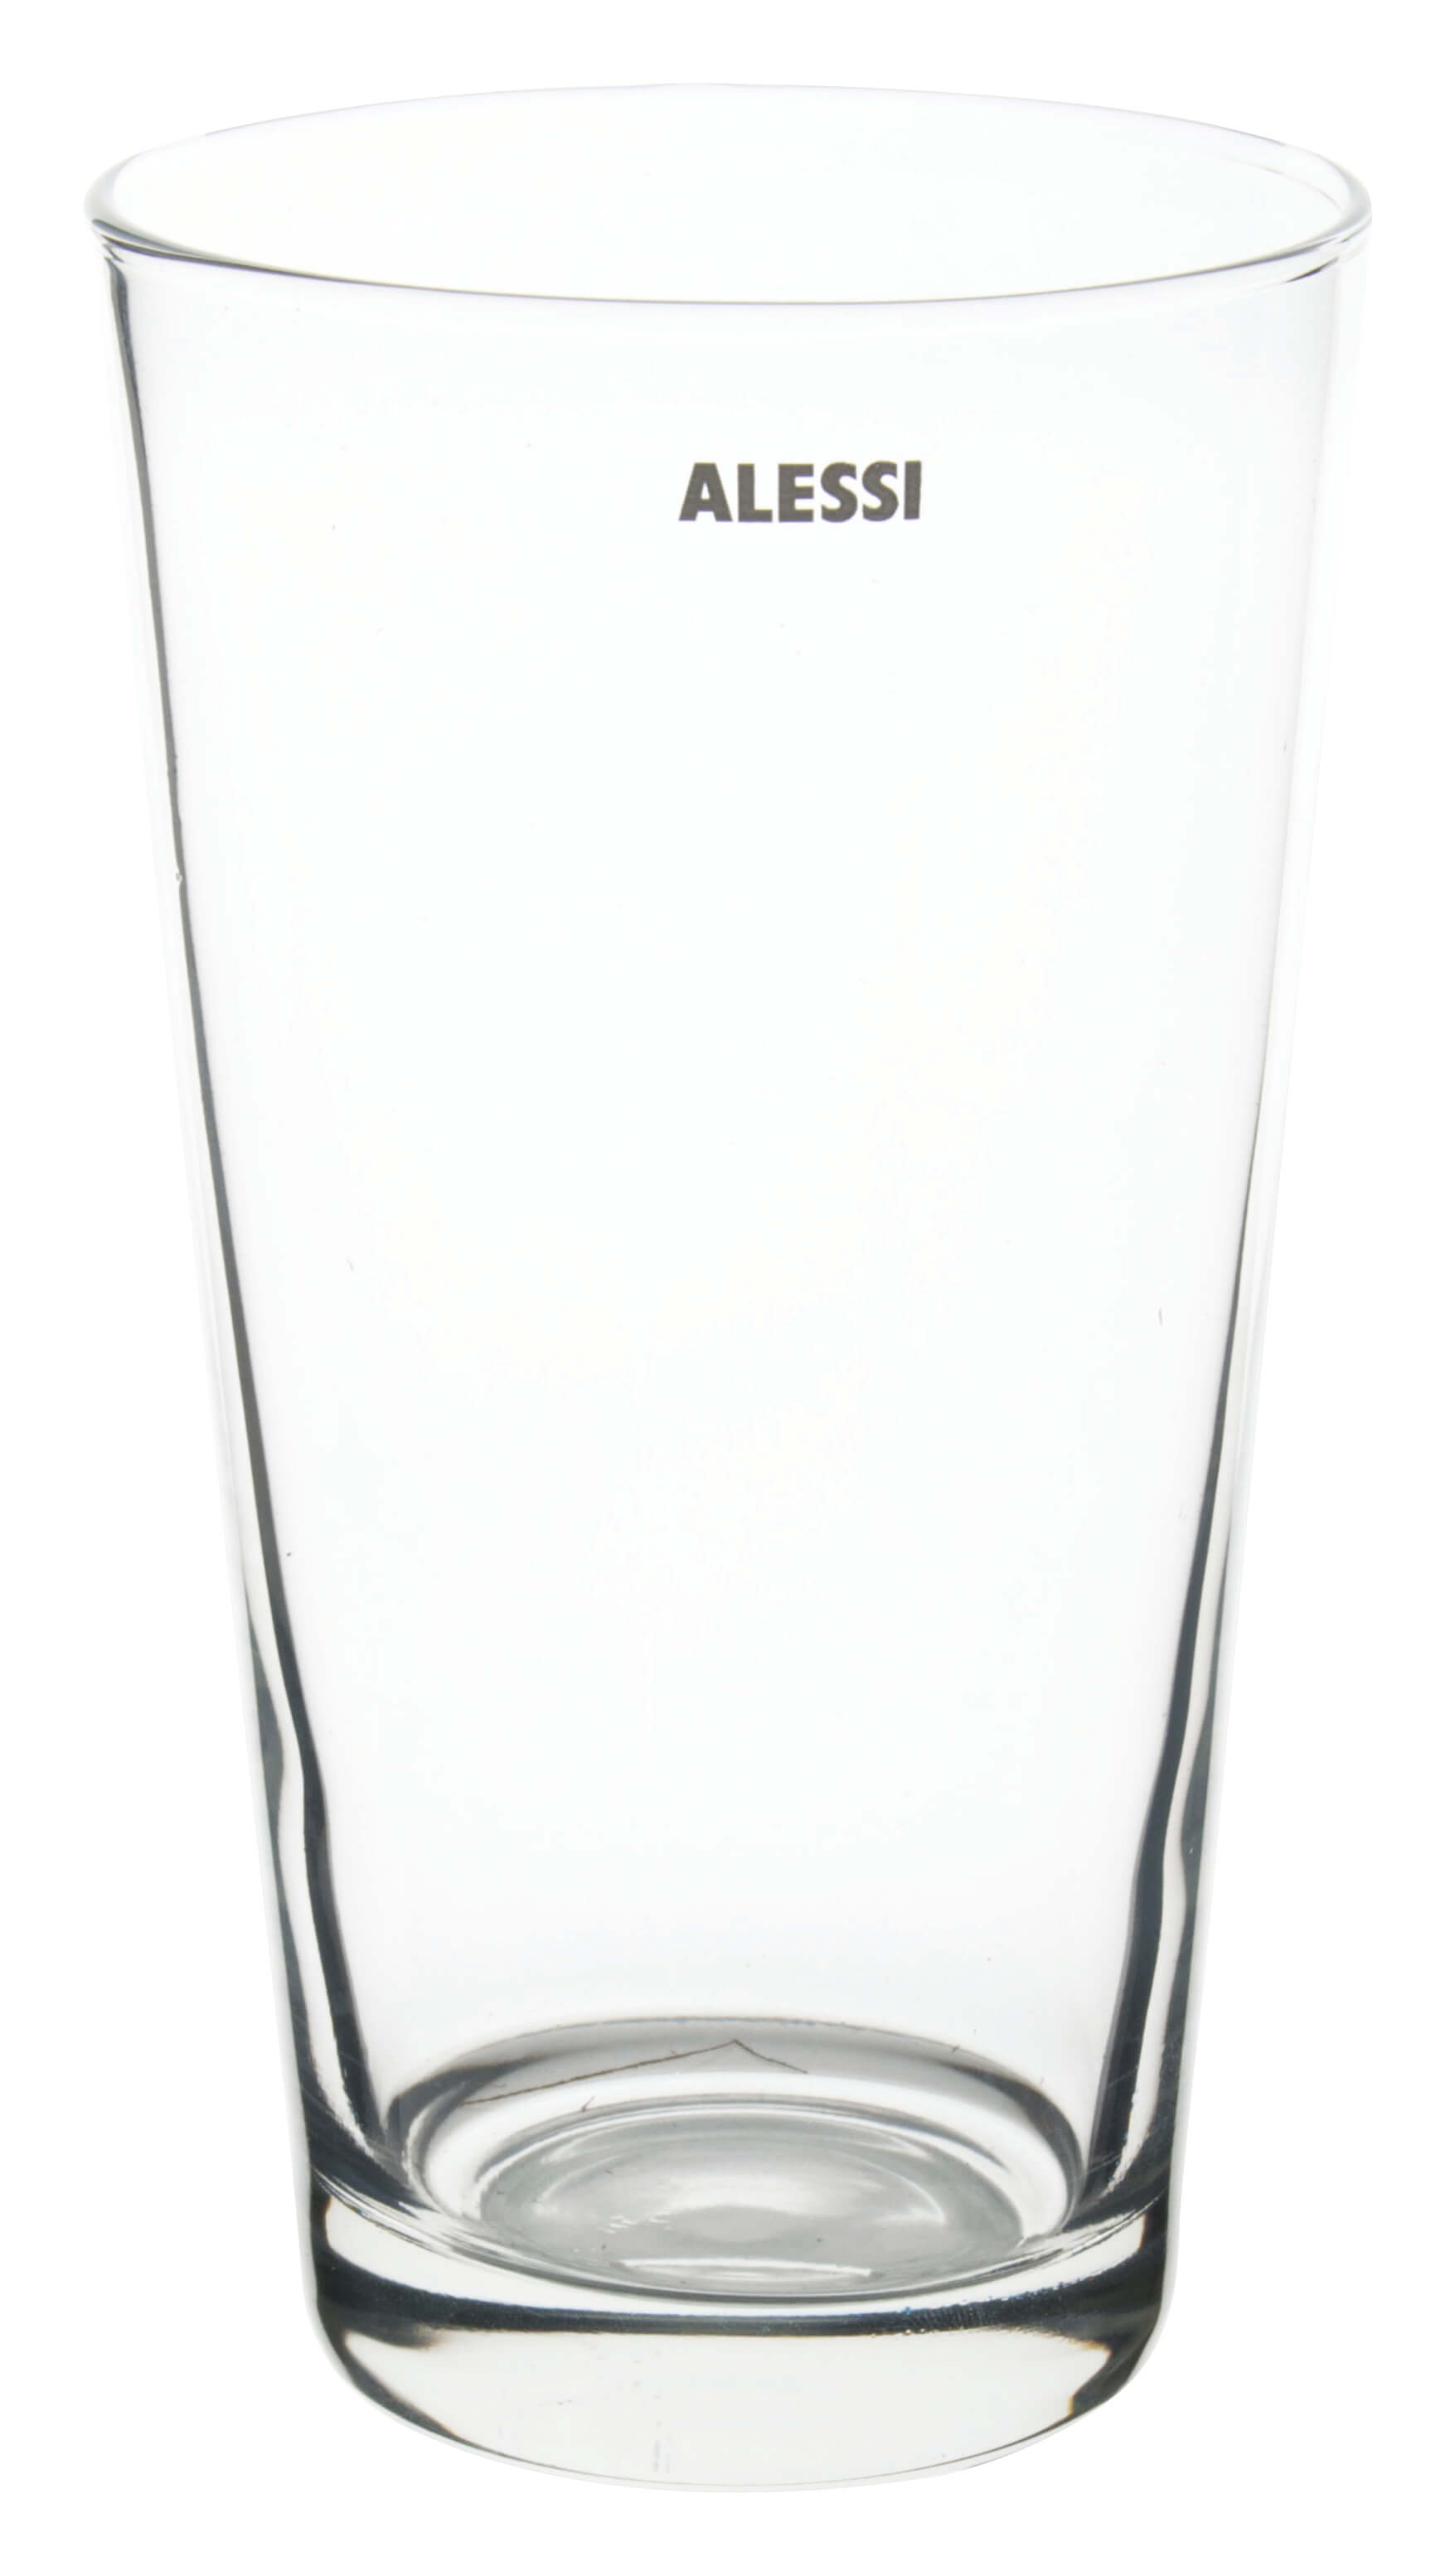 Mixing glass, Alessi - glass (470ml)